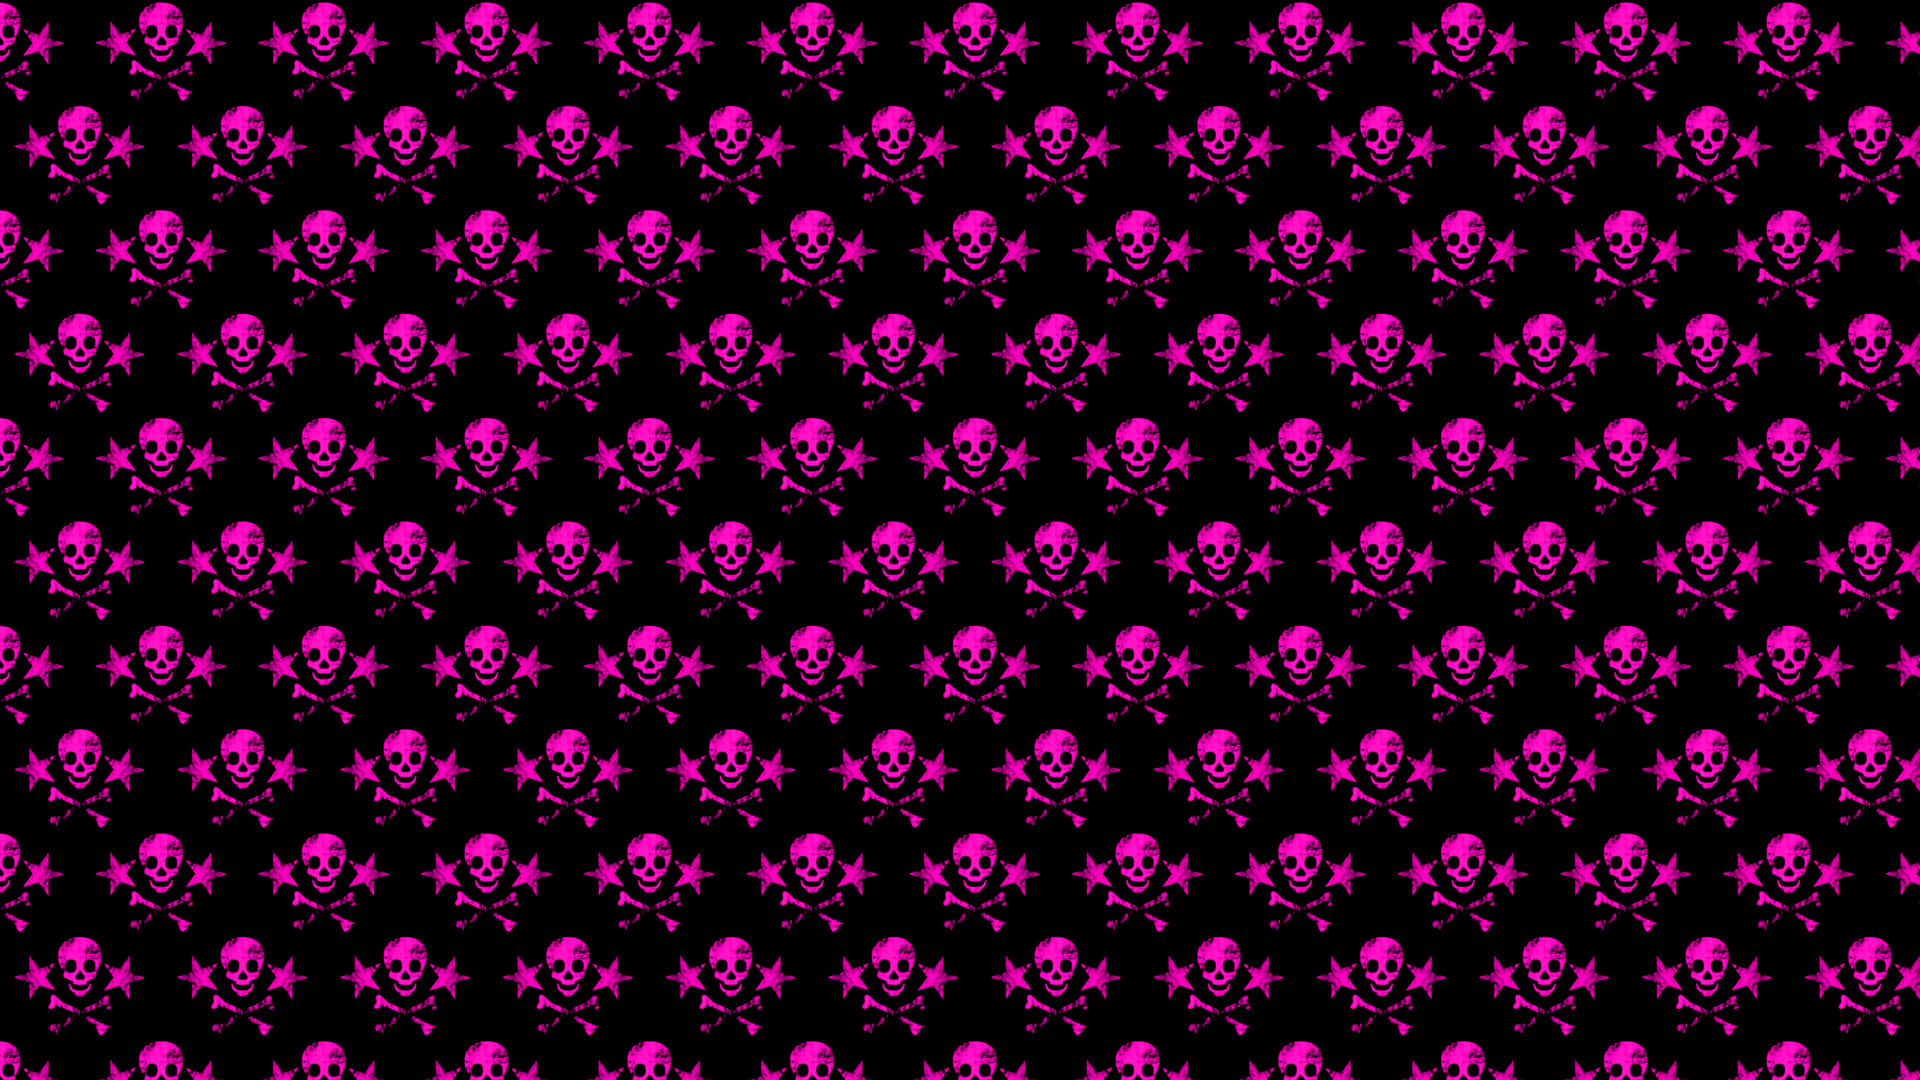 A Stunning and Eerie Pink Skull Wallpaper